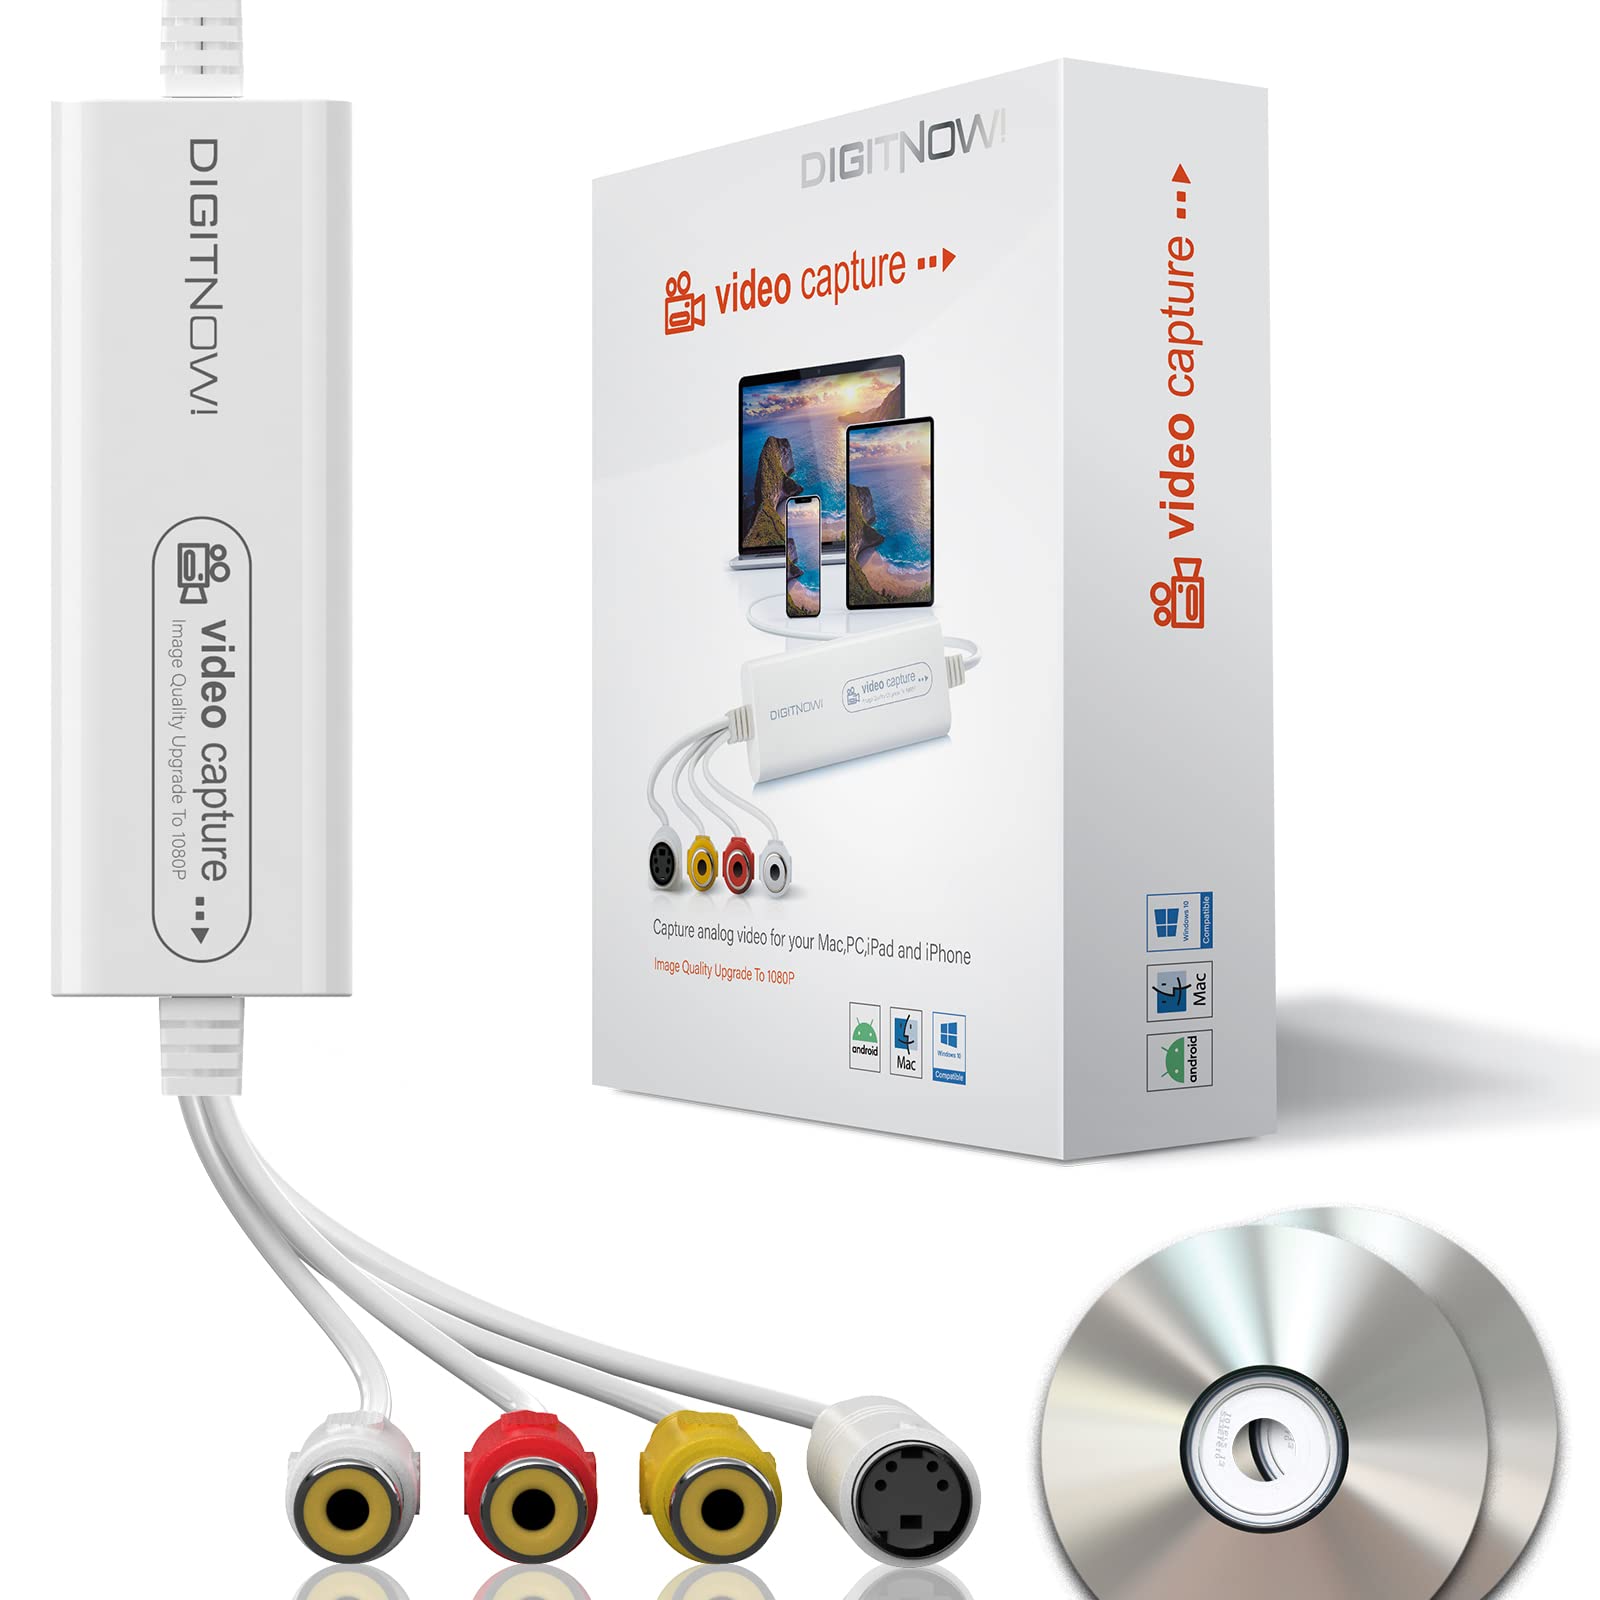 Elgato Video Capture, Capture Analog Video for Mac or PC, iPad and